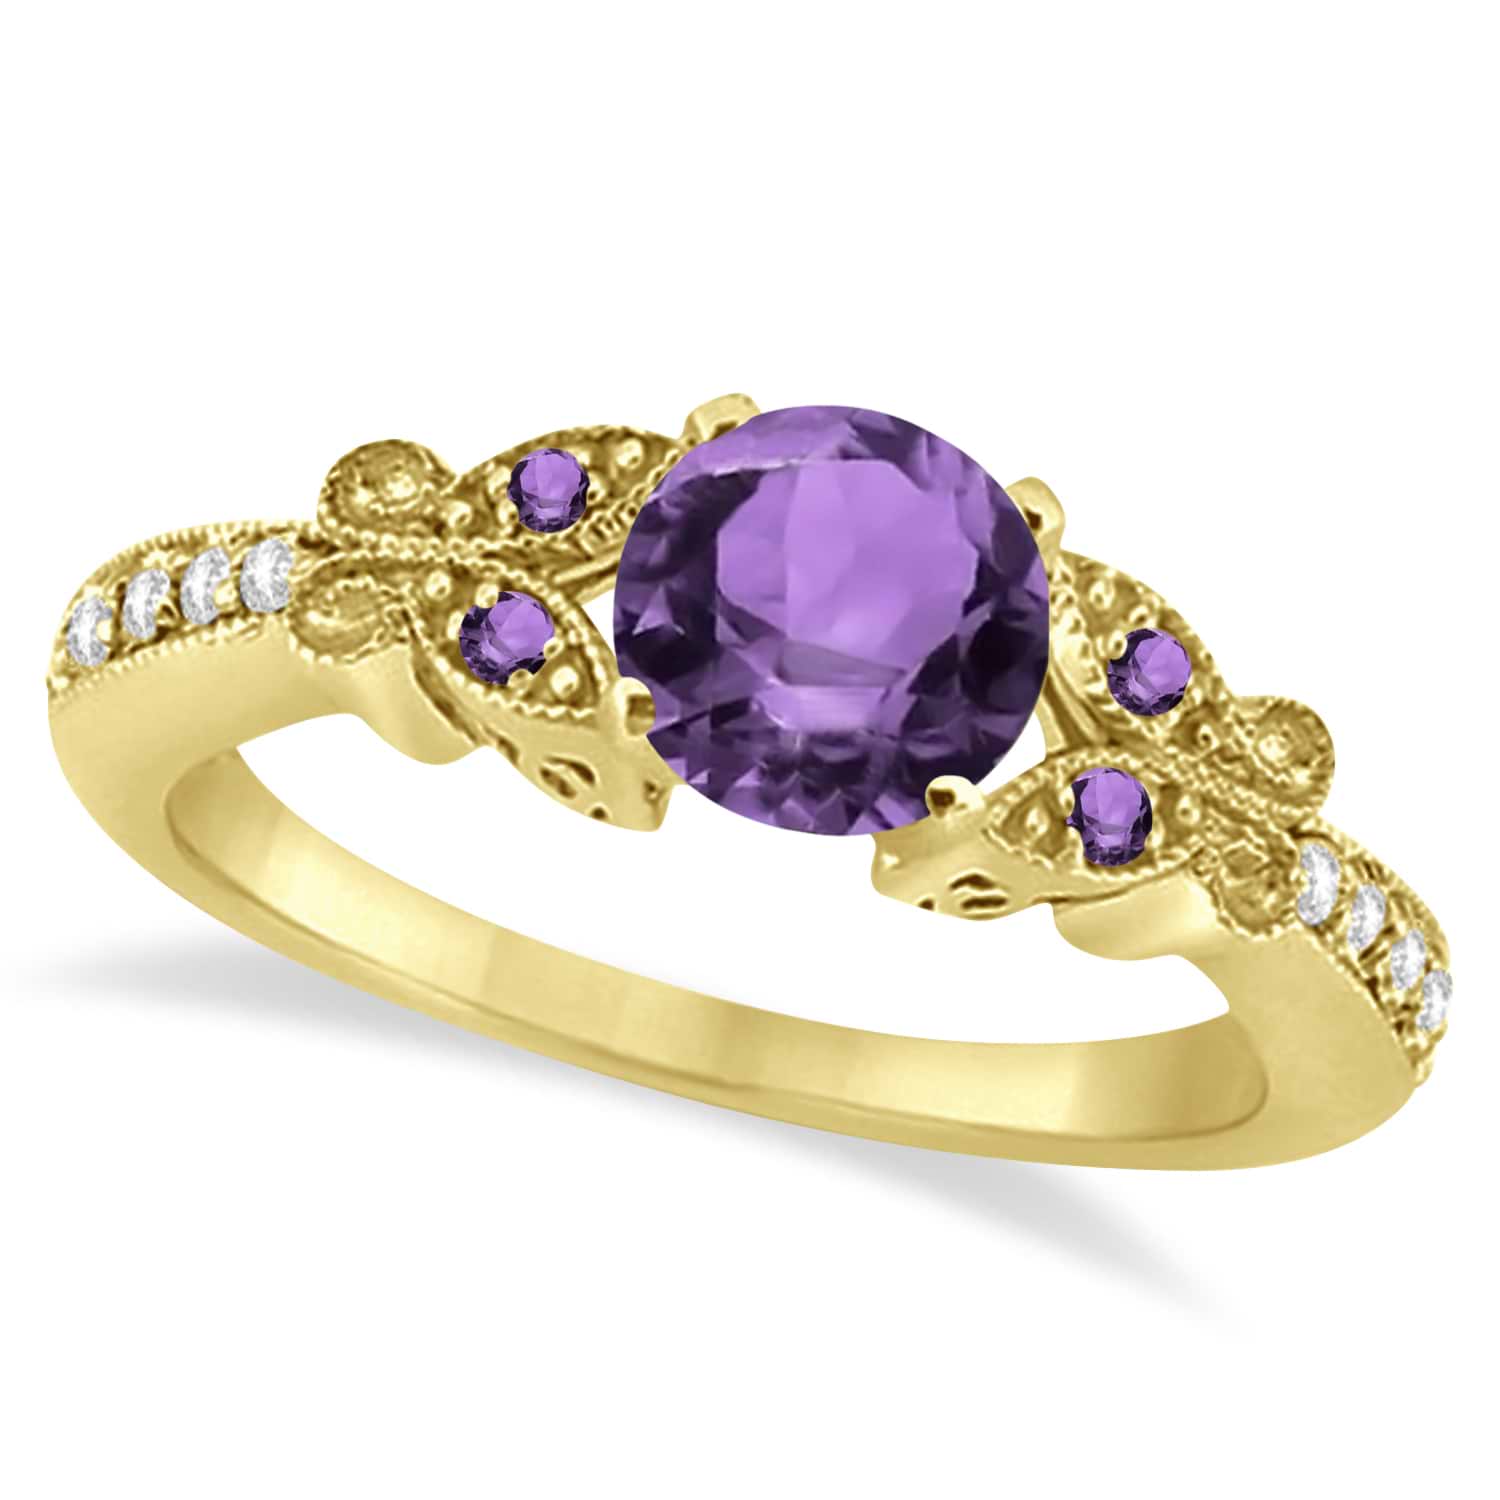 Butterfly Amethyst & Diamond Engagement Ring 14K Yellow Gold 1.28ctw